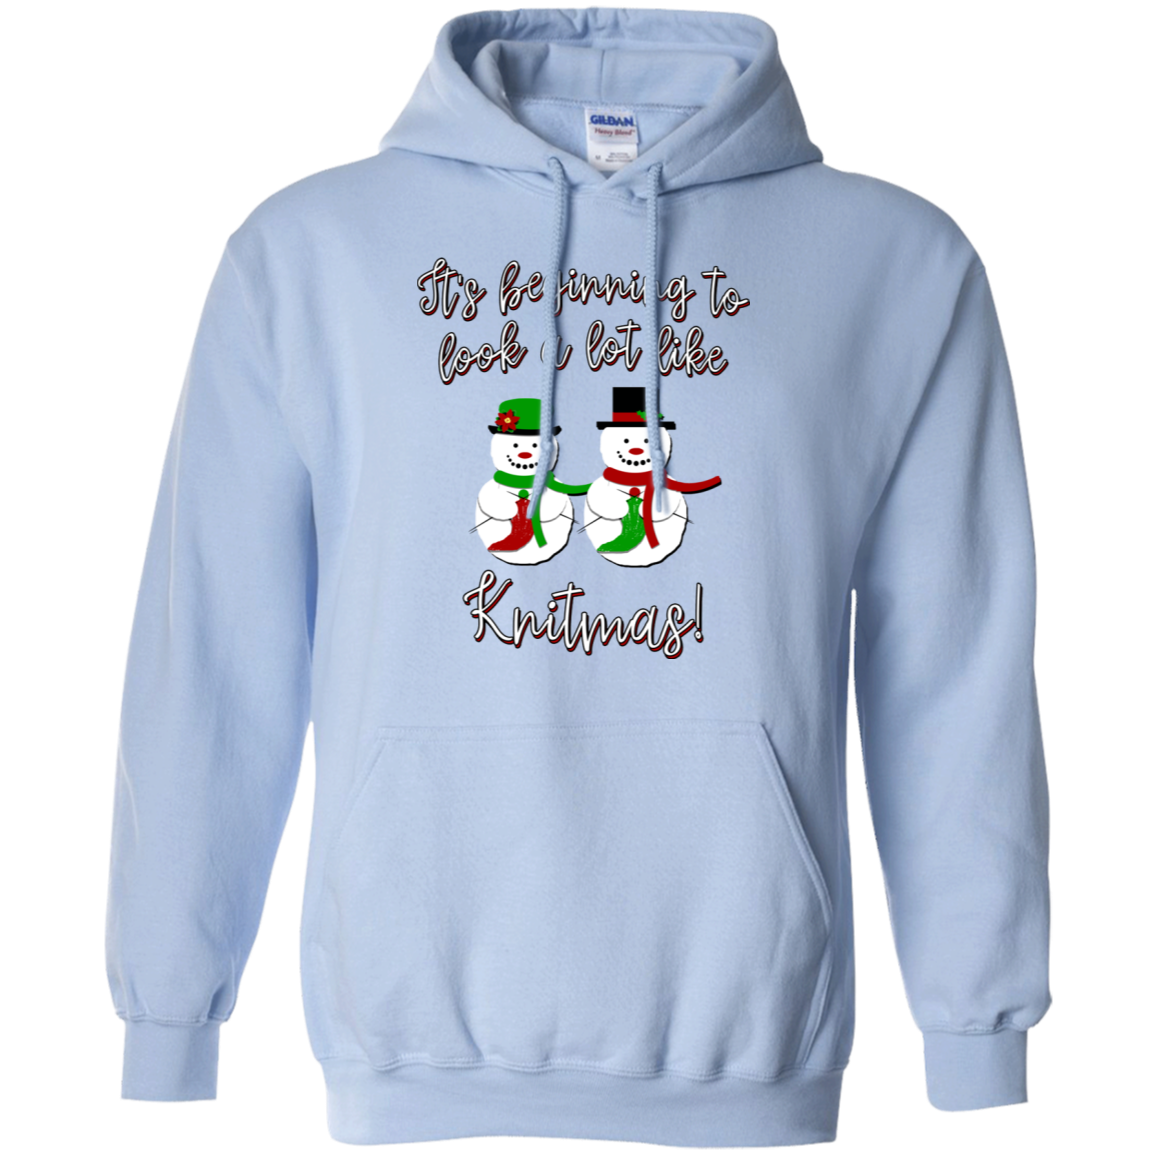 Knitmas Snow Couple Pullover Hoodie